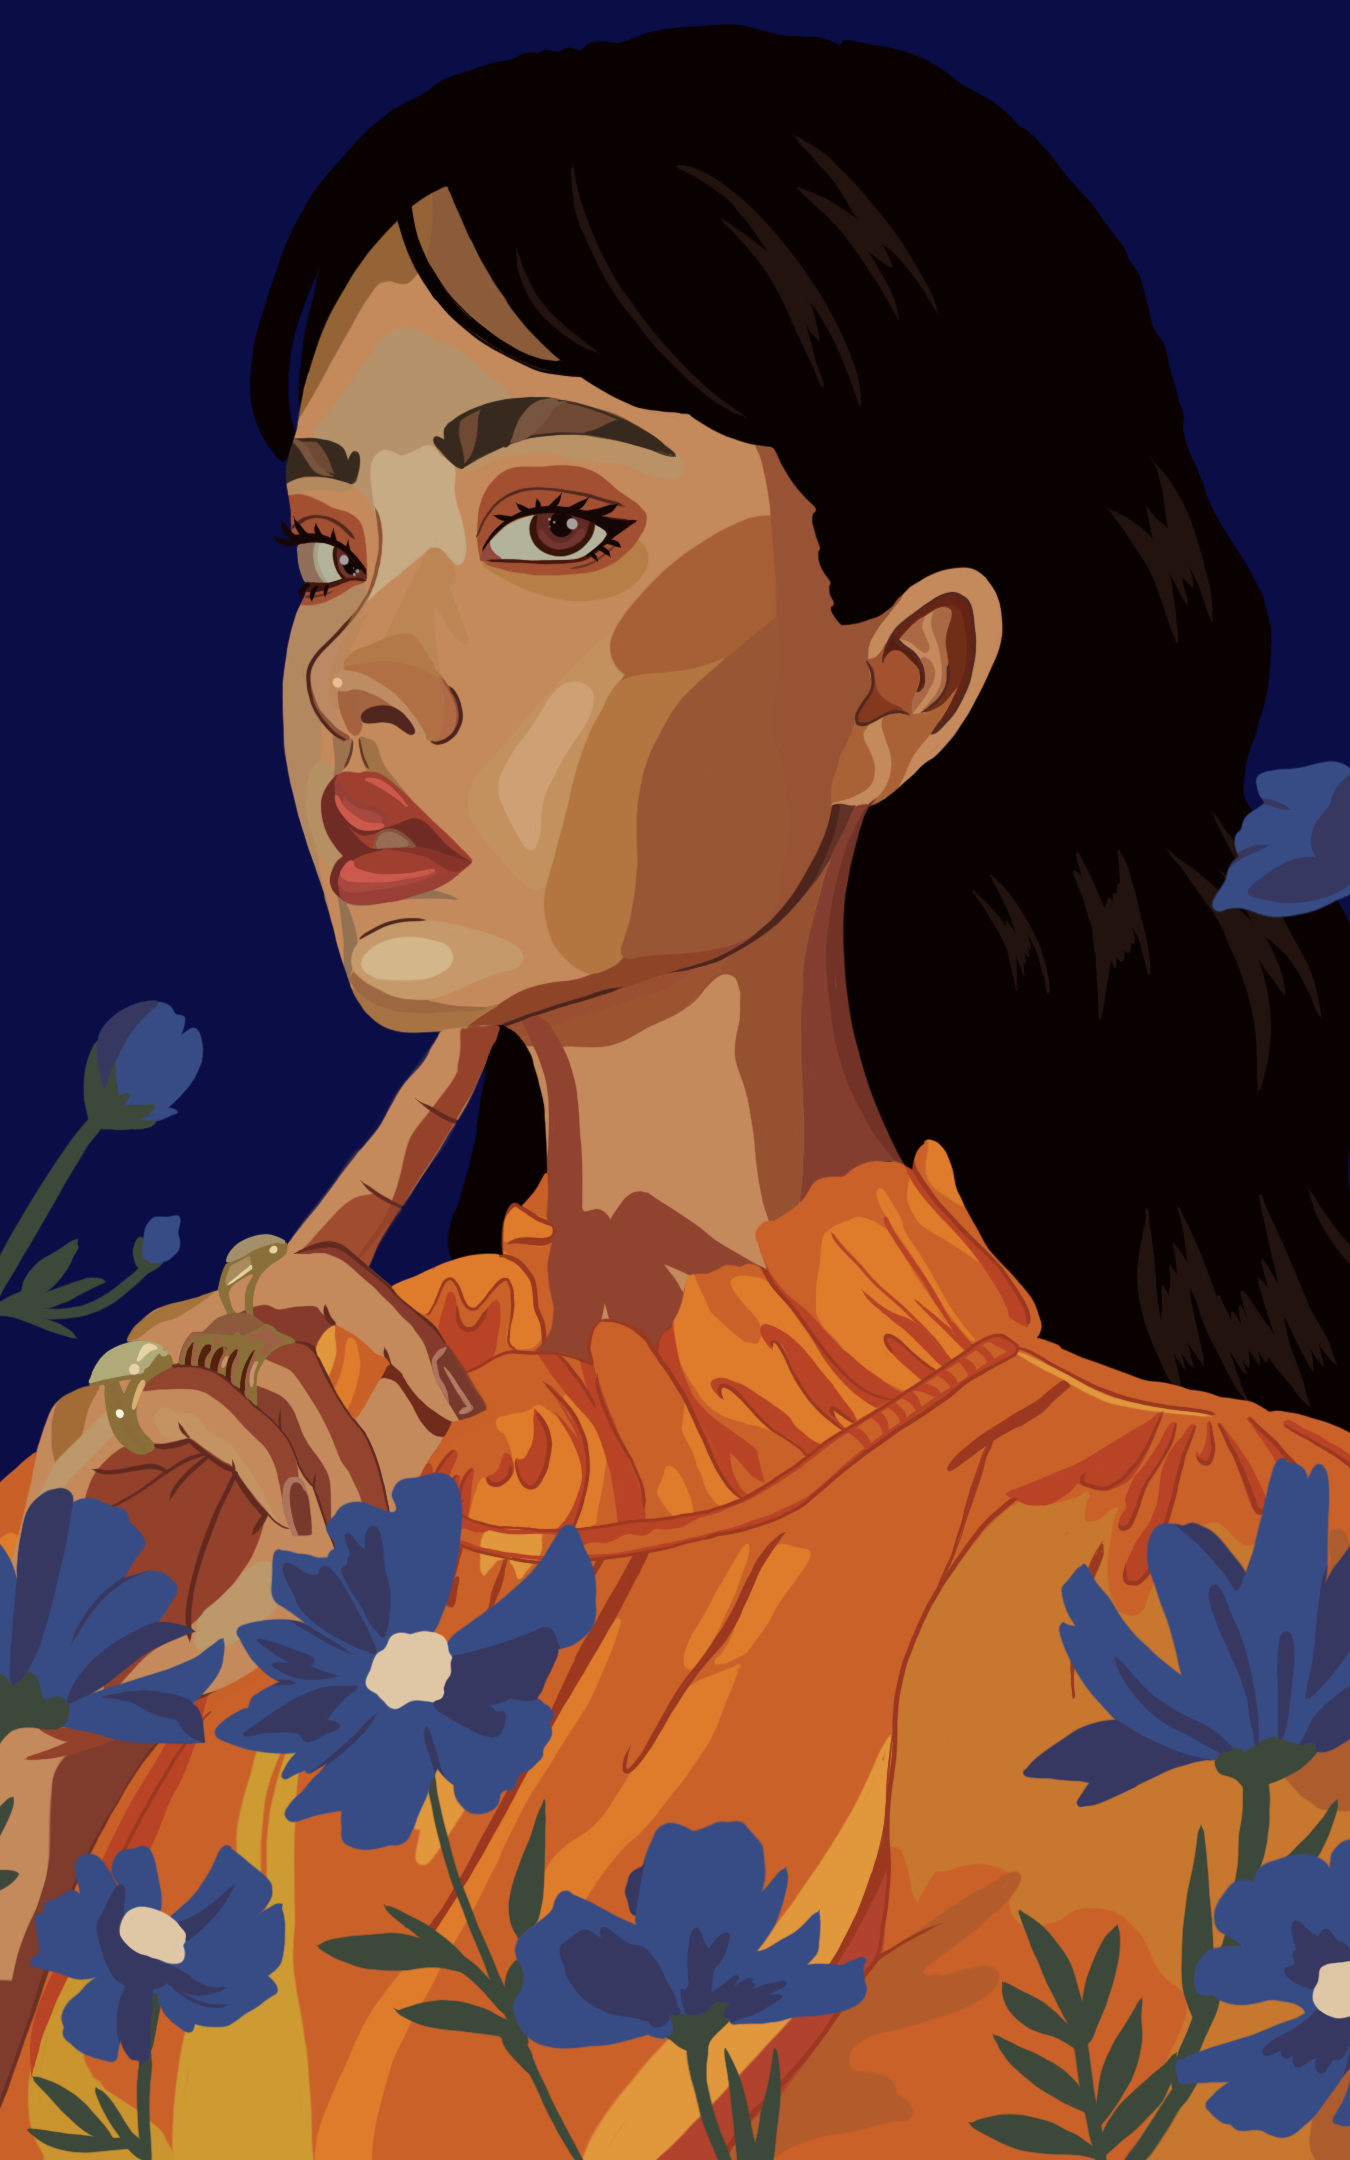 Illustration of woman wearing an orange shirt surrounded by blue flowers